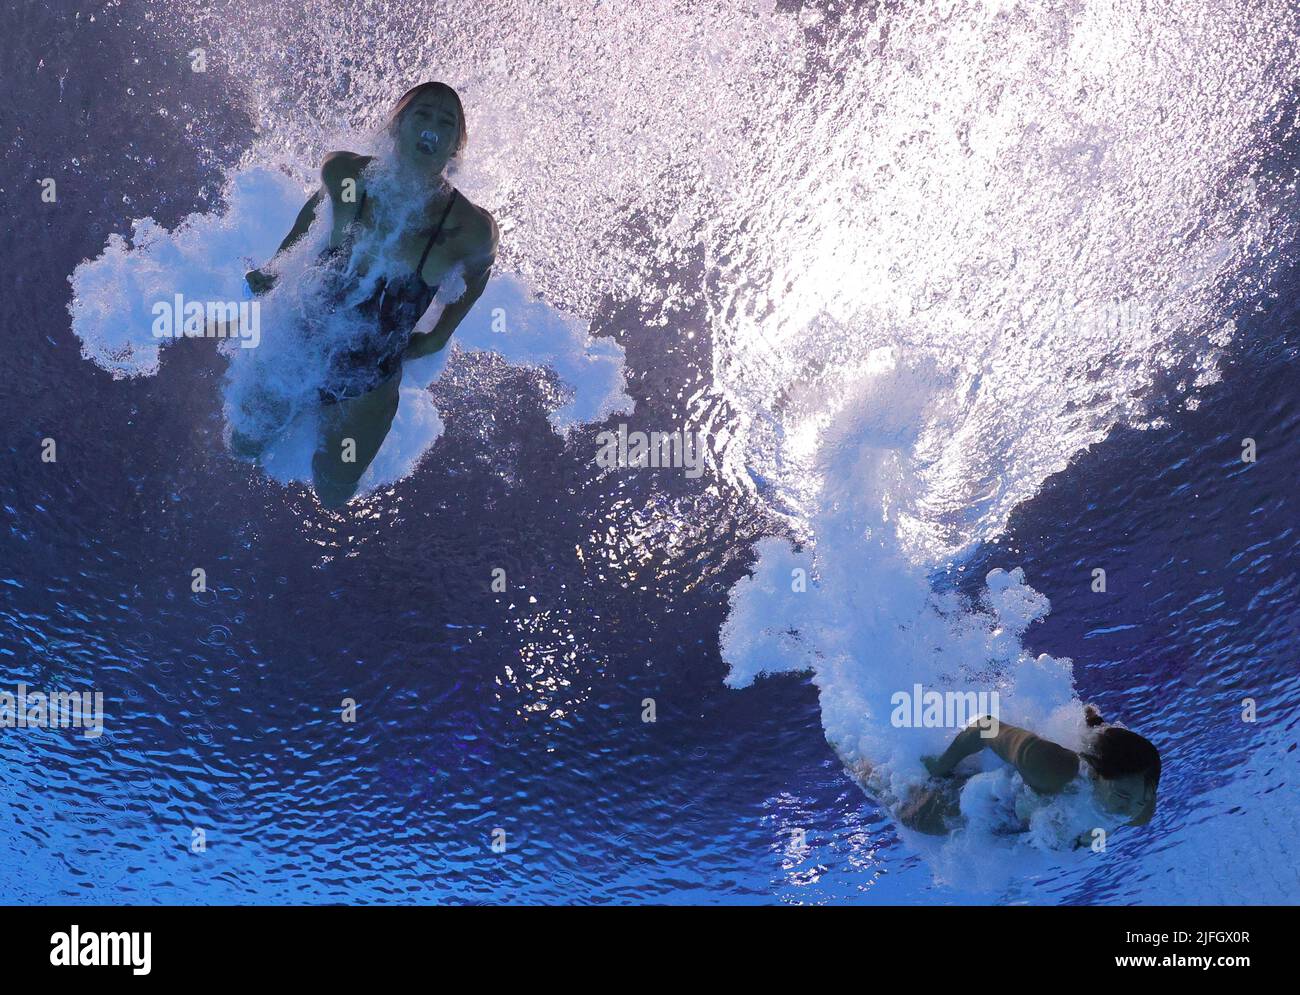 Diving - FINA World Championships - Duna Arena, Budapest, Hungary - July 3, 2022 Colombia's Diana Isabel Pineda Zuleta and Daniela Zapata Correa in action during the women's 3m synchronised final REUTERS/Antonio Bronic Stock Photo